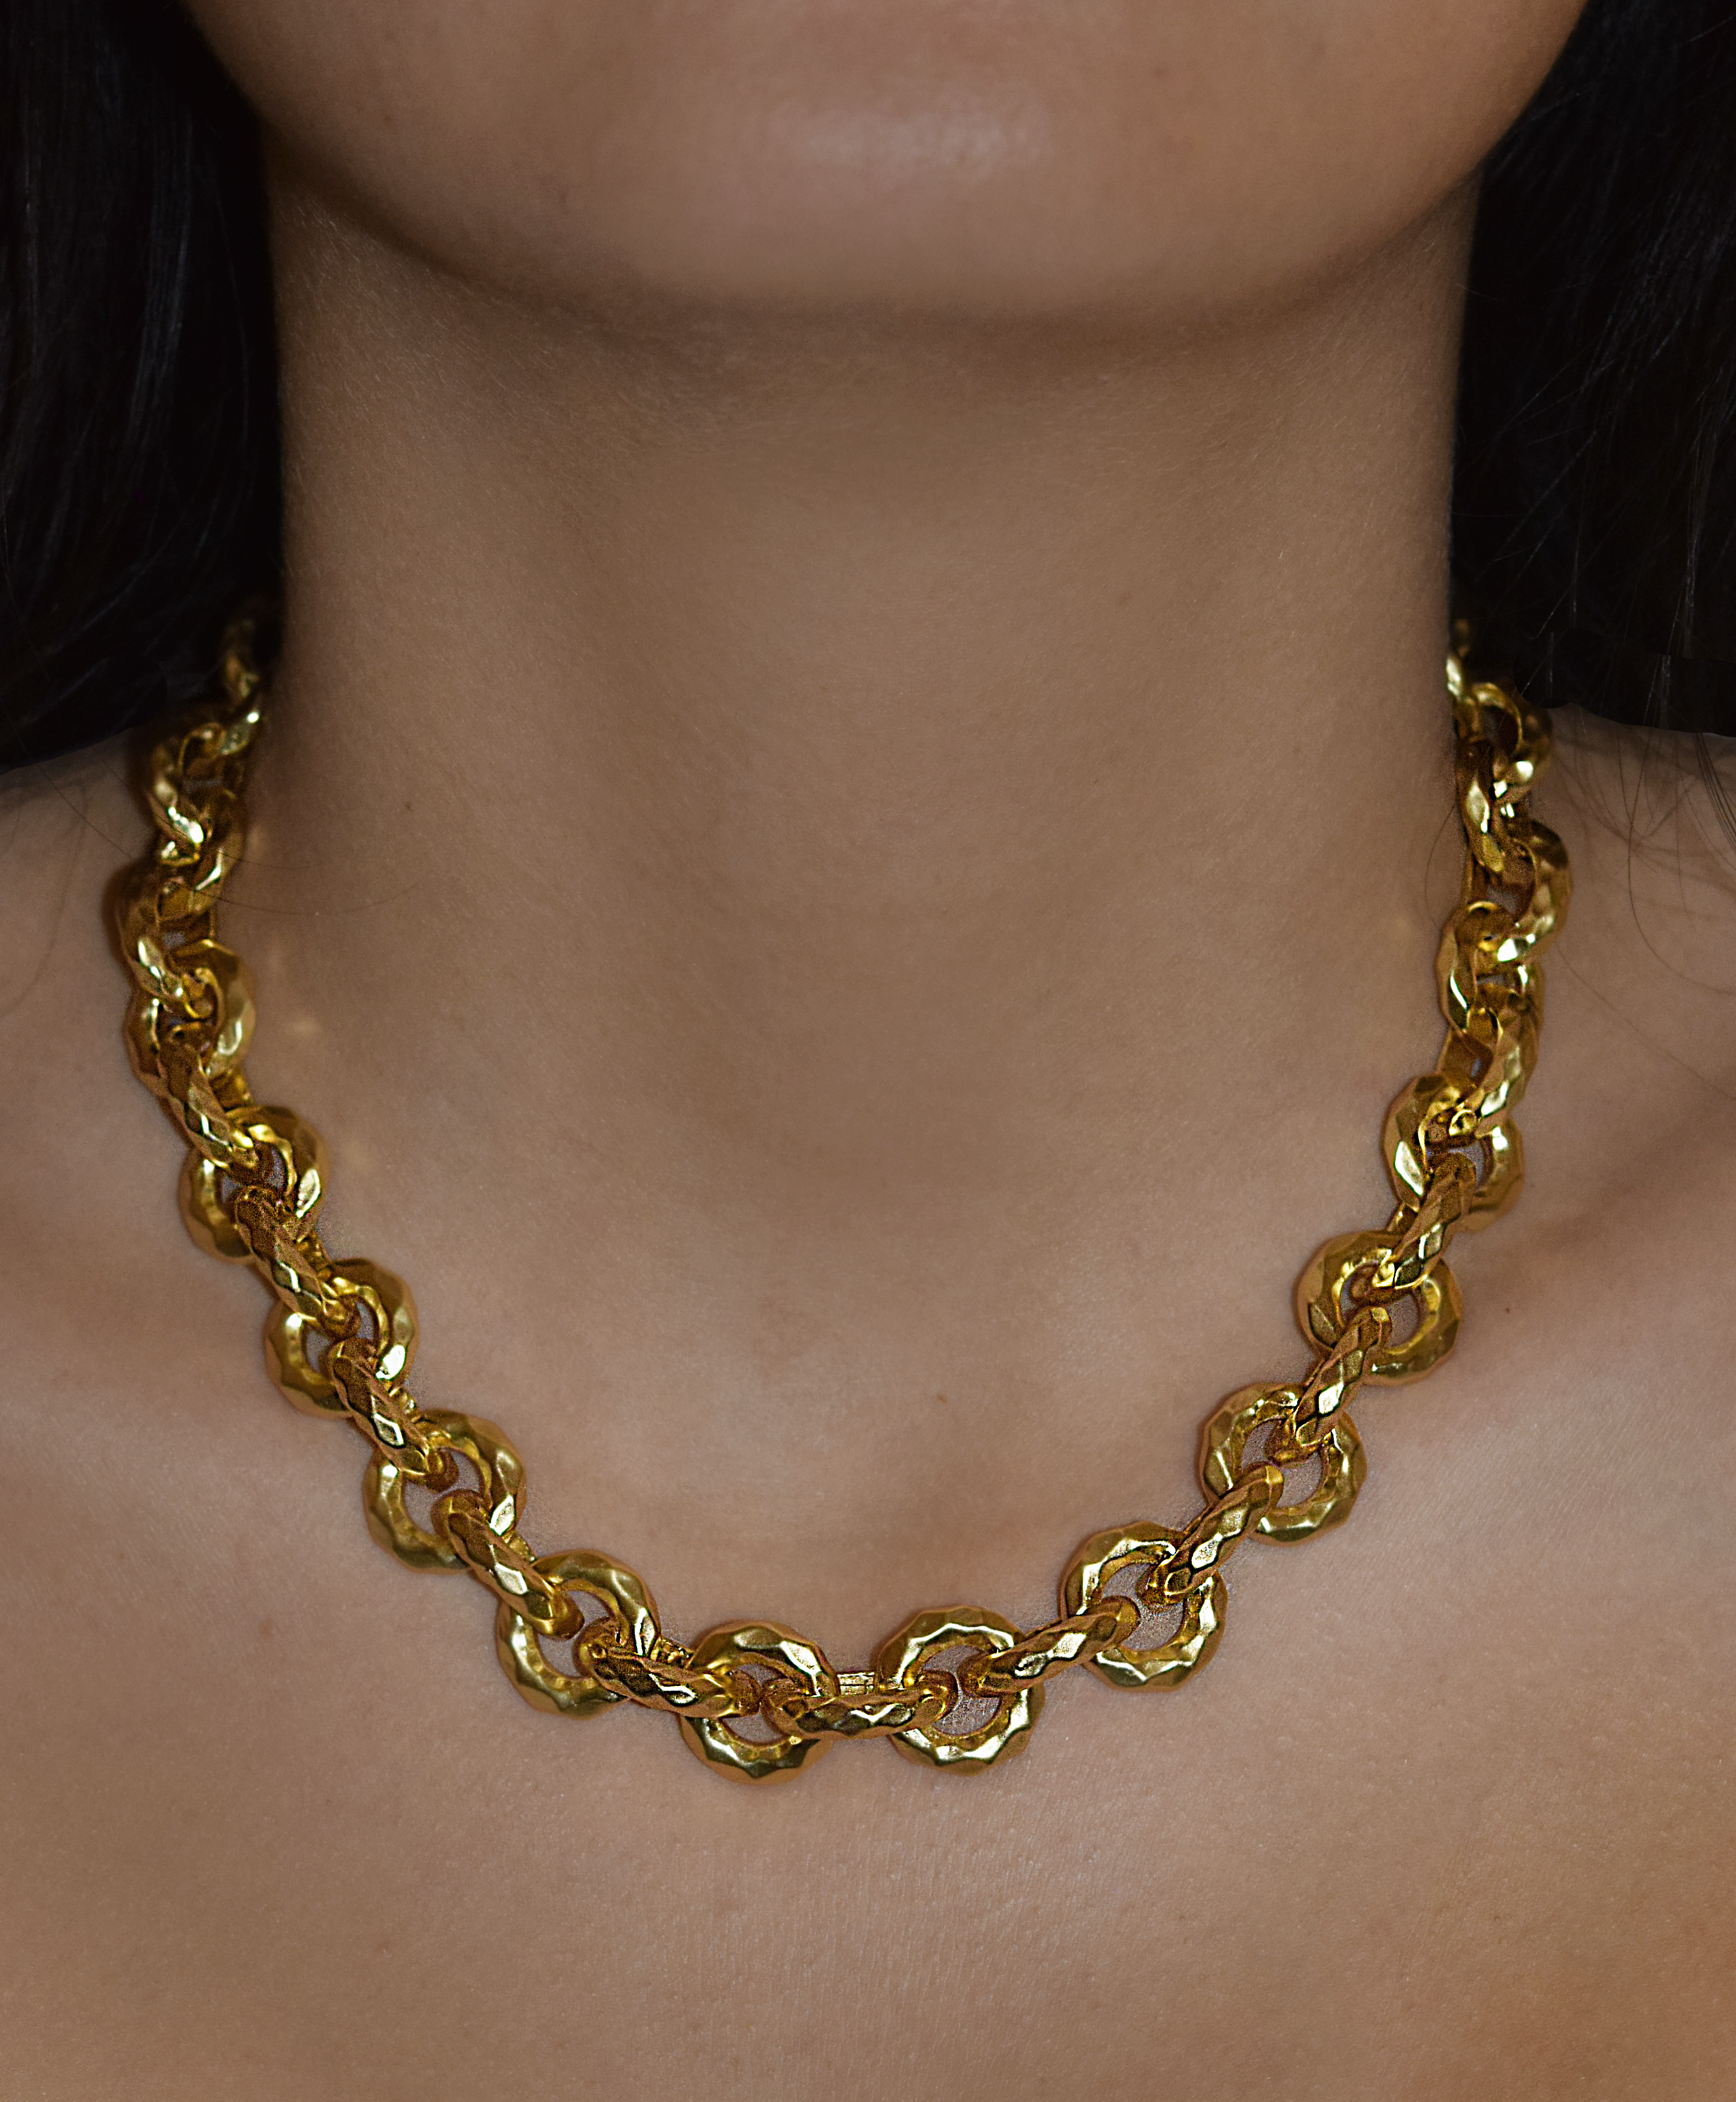 Luxurious round link collar necklace